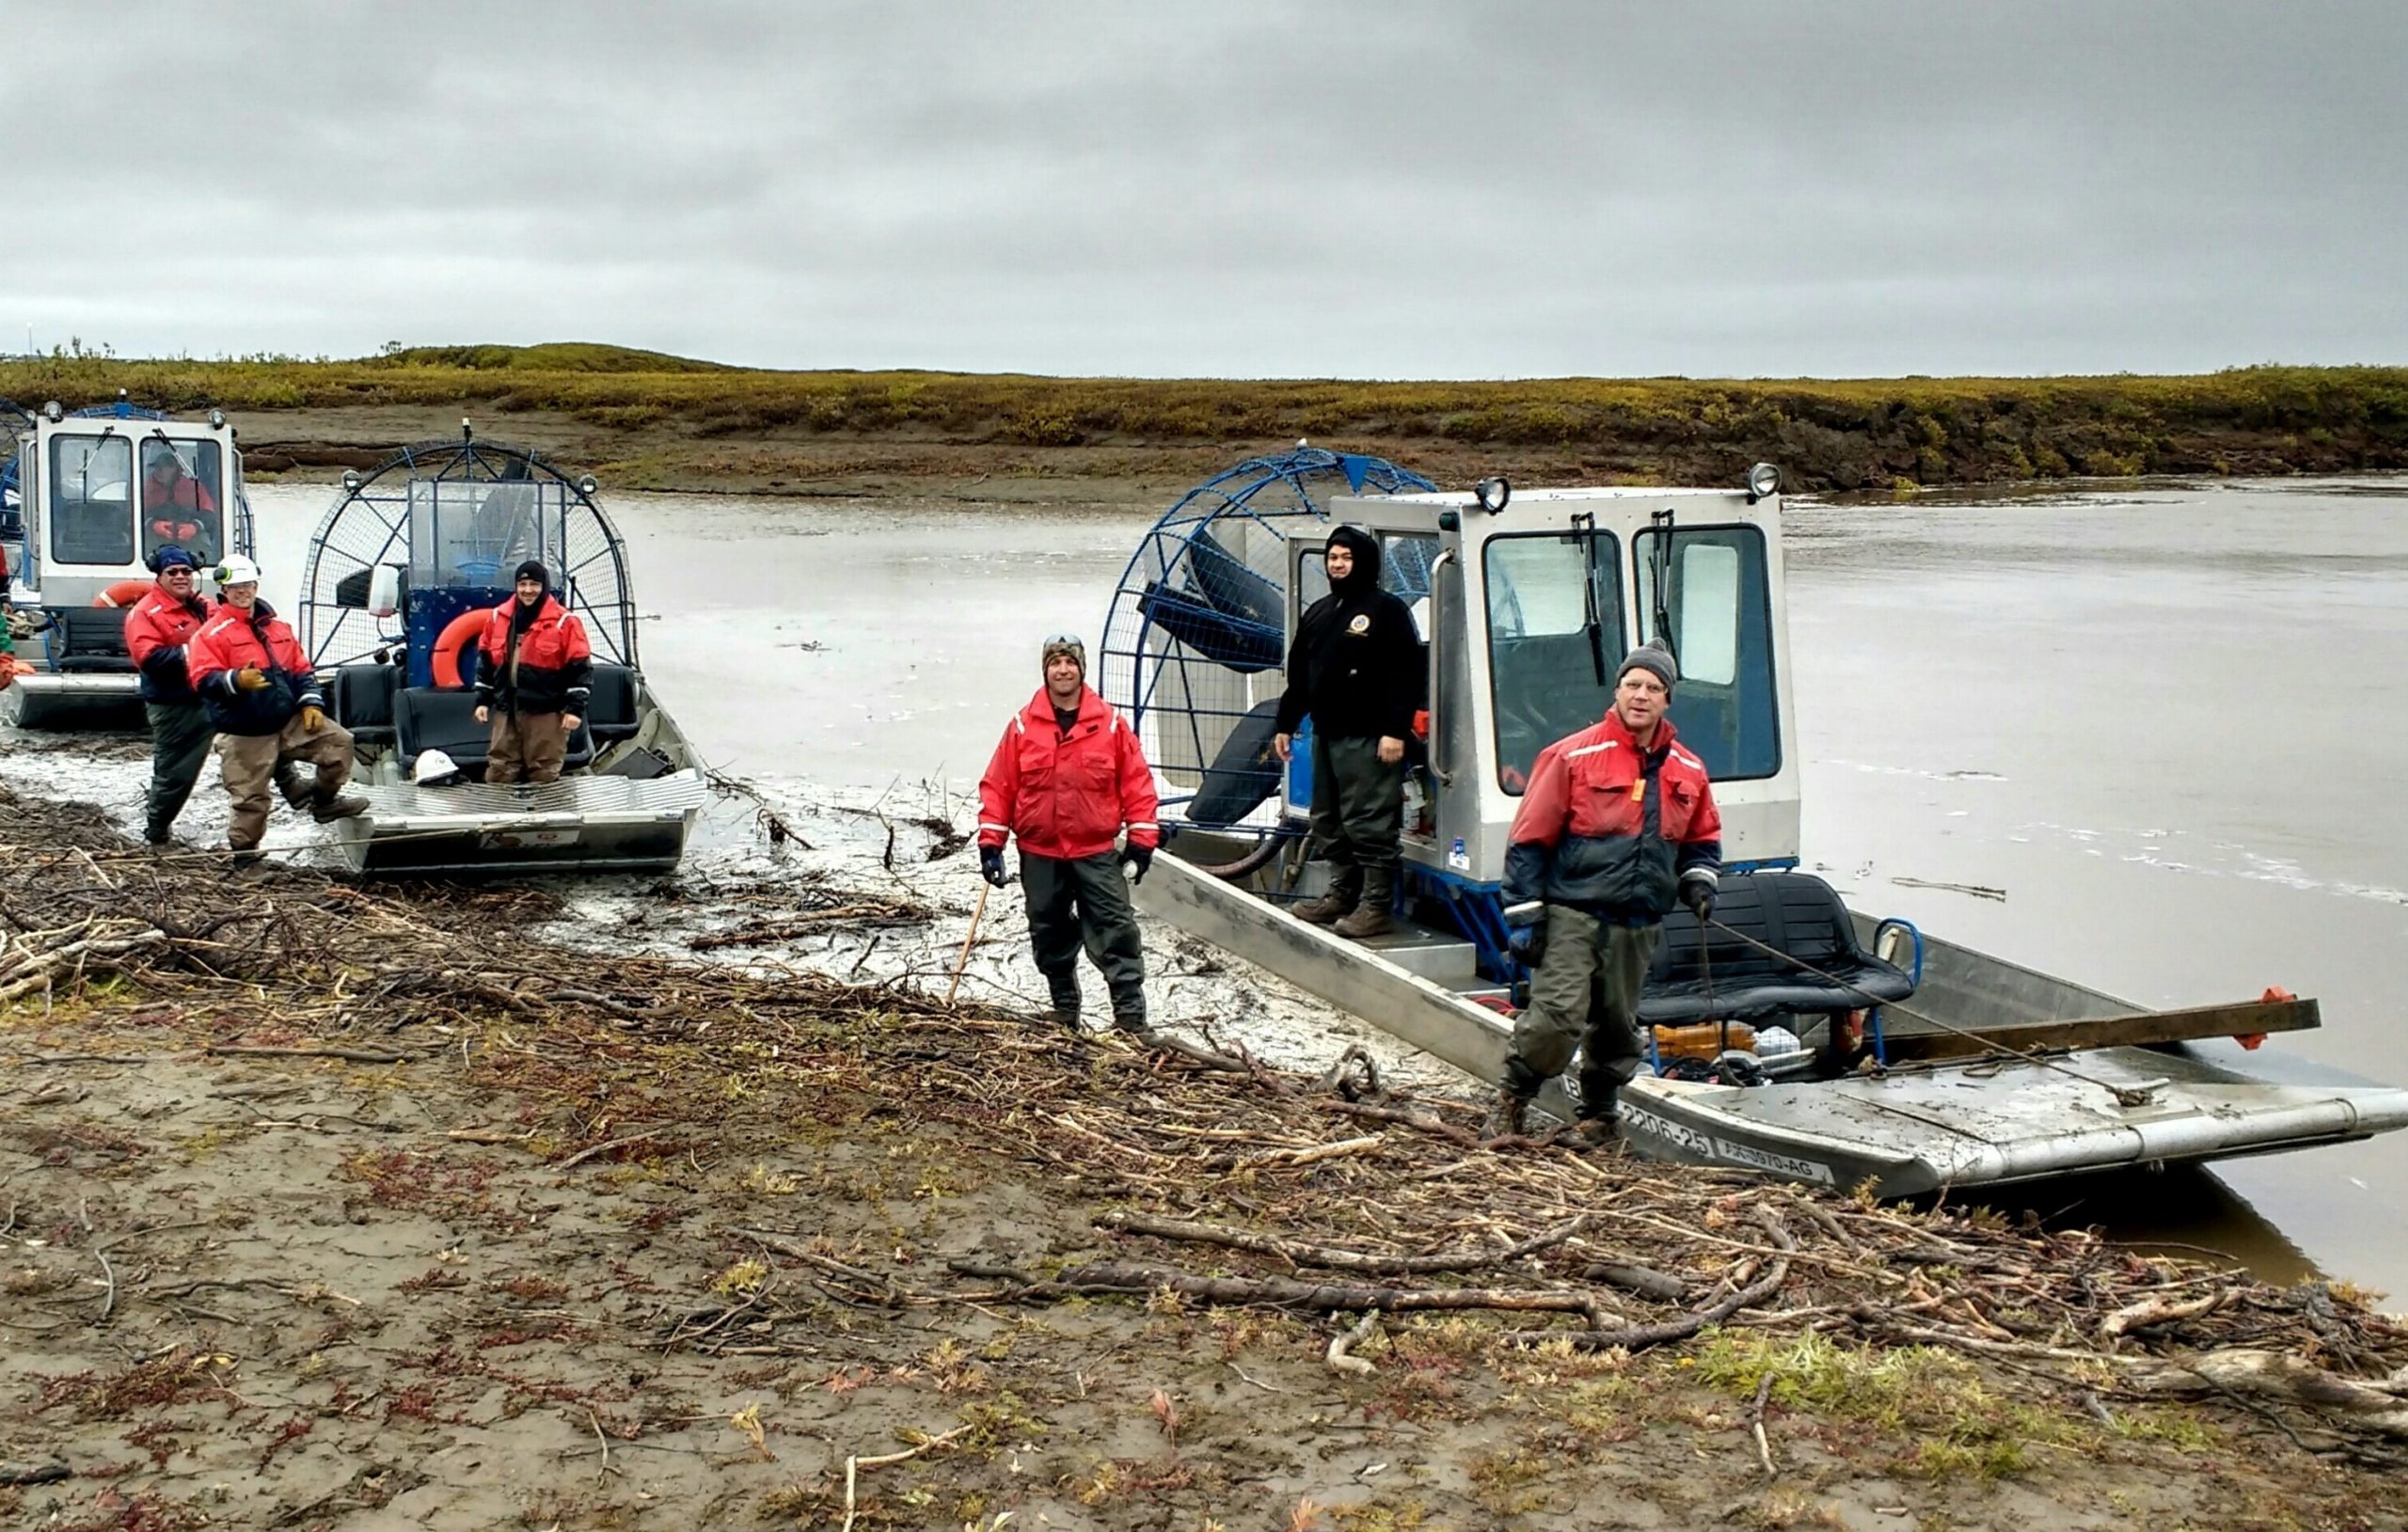 Alpine Spill Response Team practicing airboat operations and river response tactics